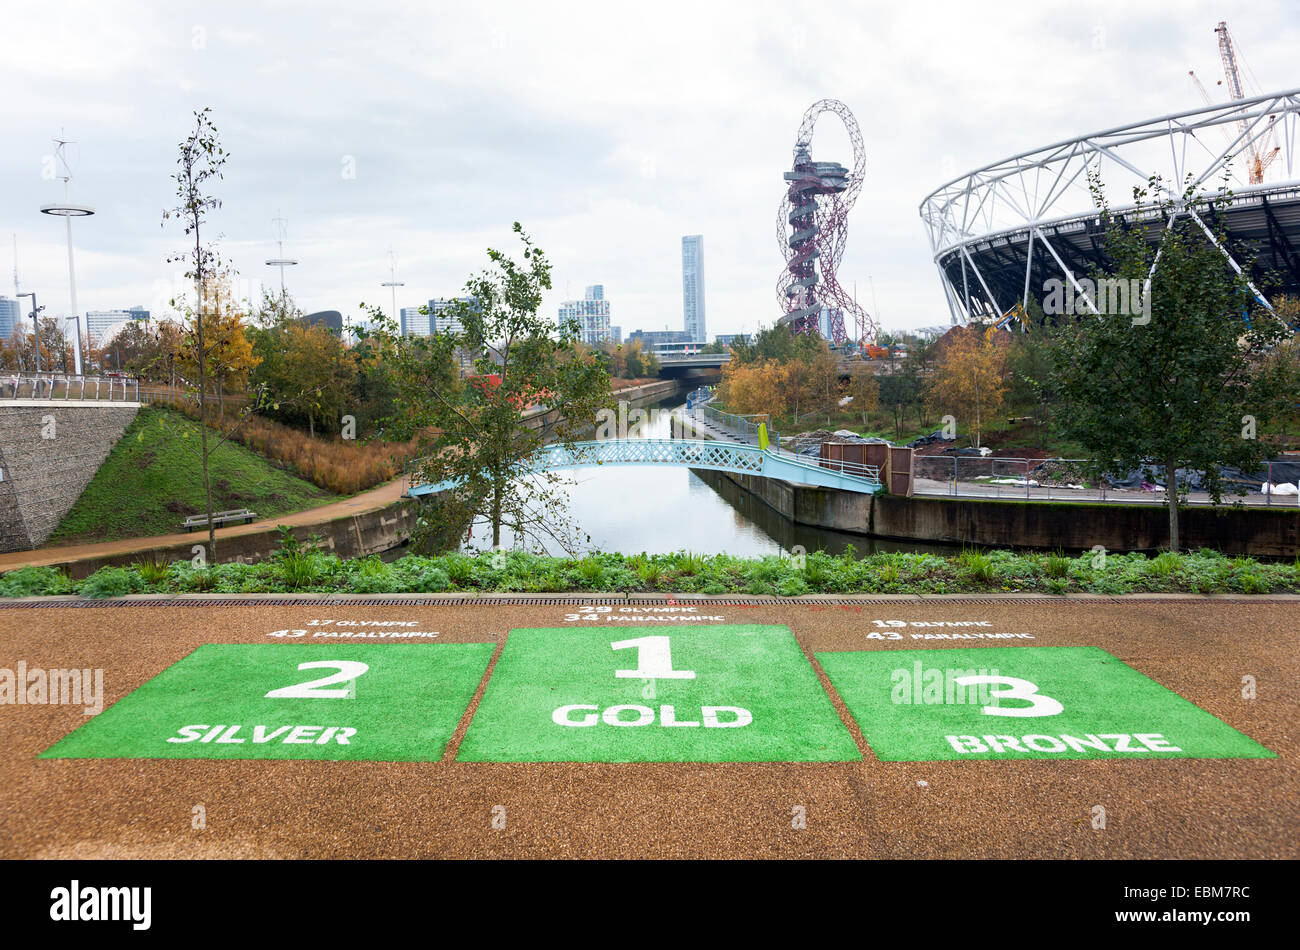 Olympic Park in Stratford, London, England - facts telling how many medals were won by the UK in the 2012 Olympic games Stock Photo